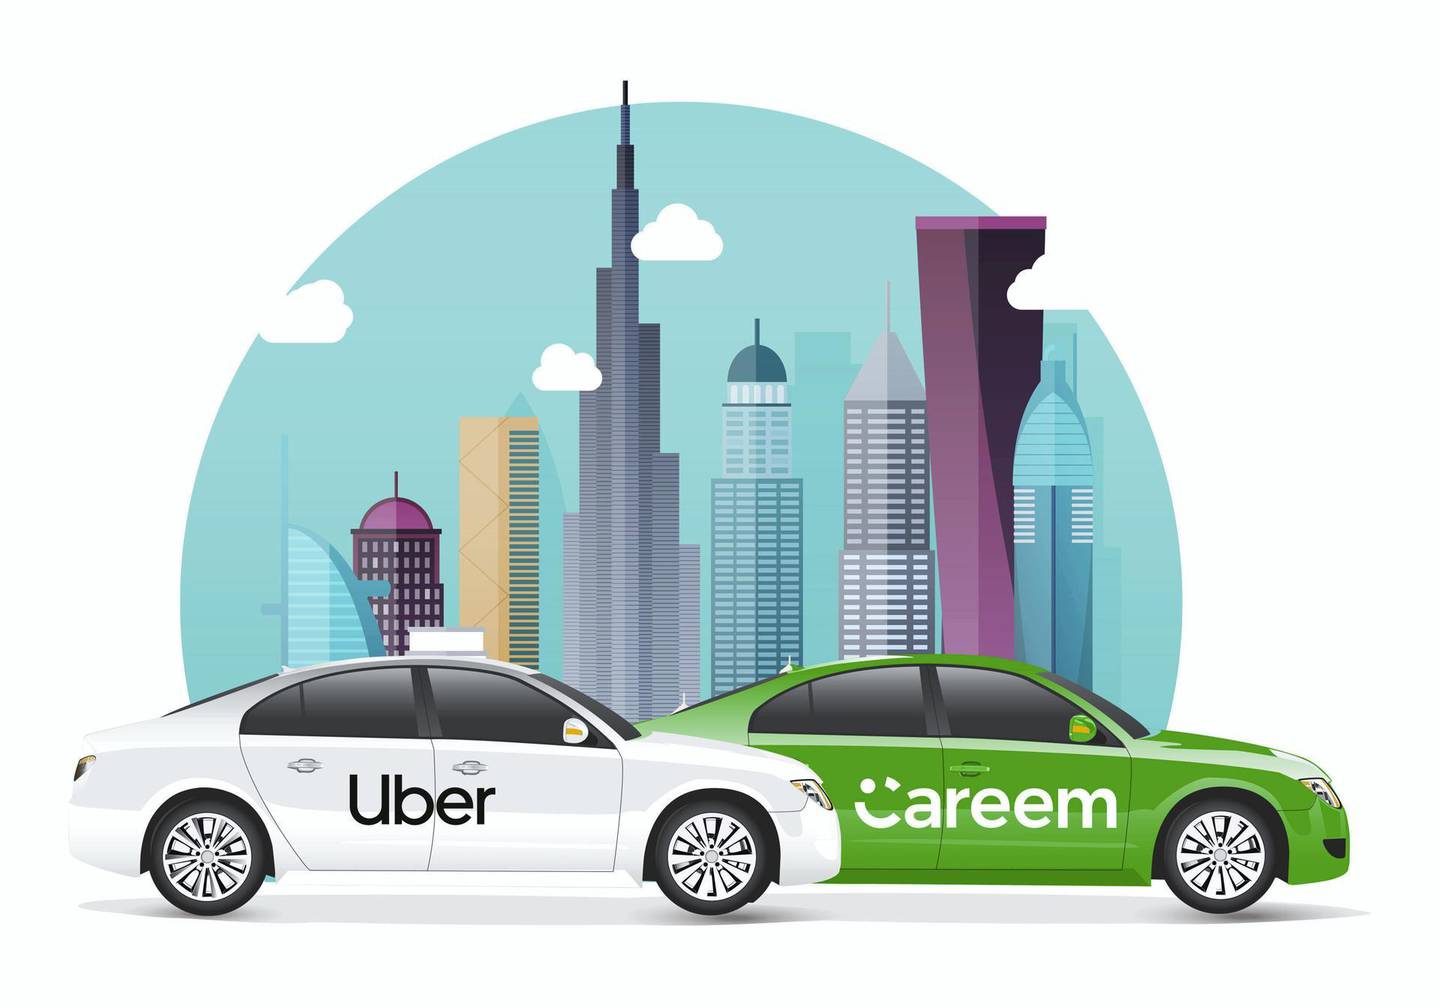 Careem will become a wholly-owned but independent subsidiary of Uber.